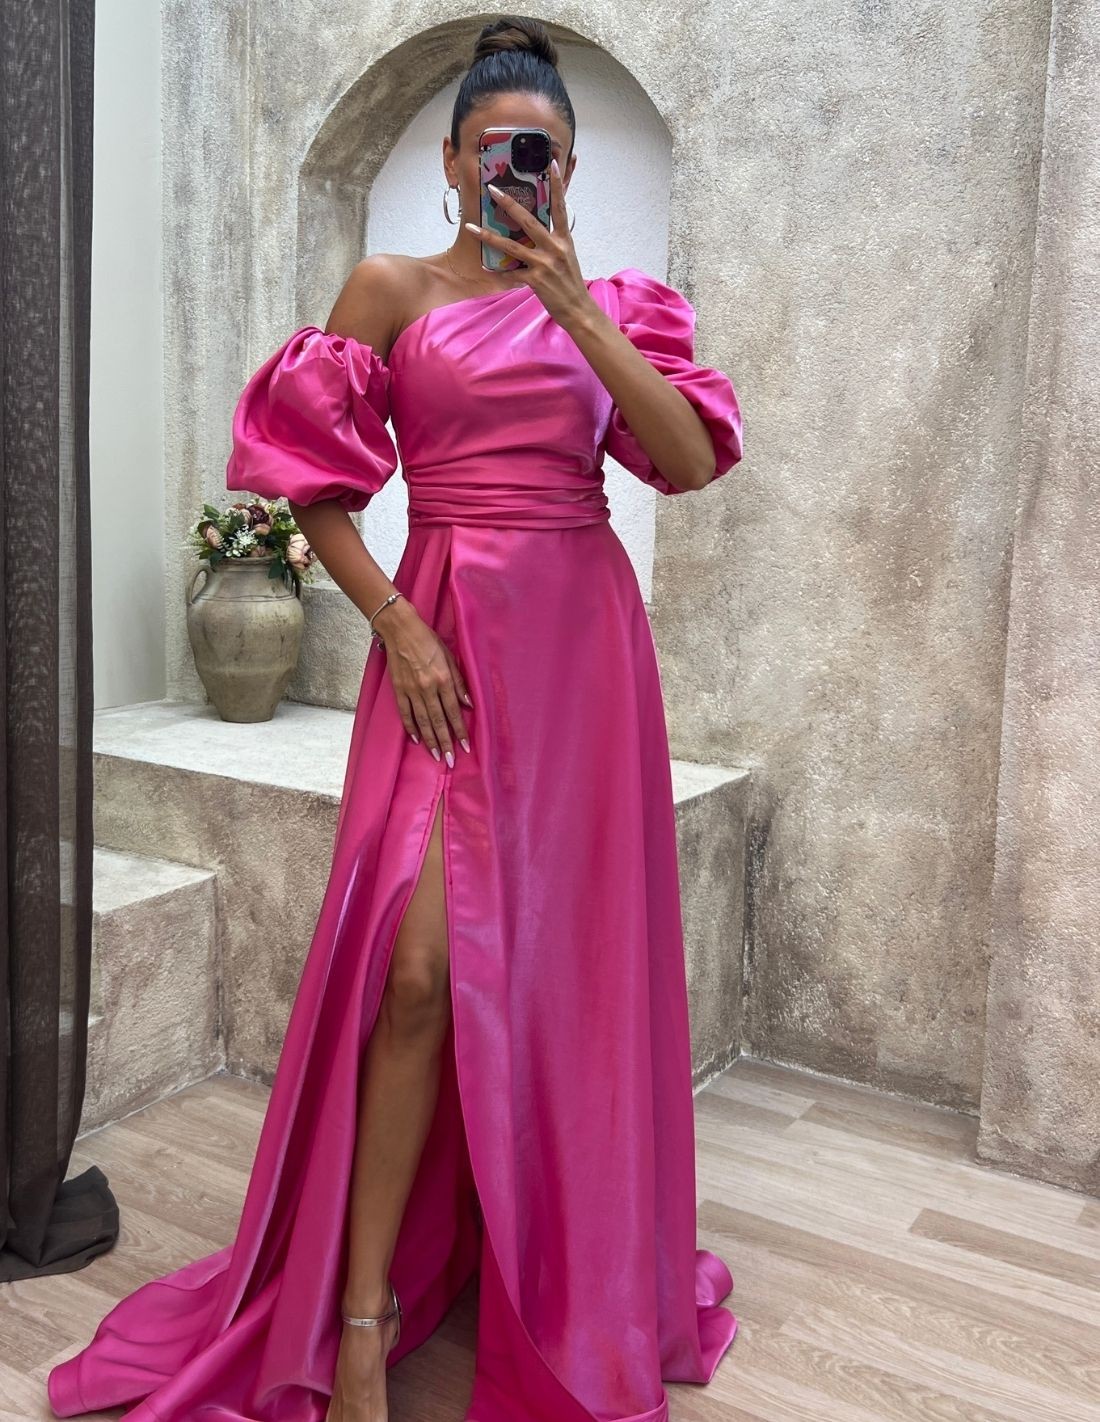 25 Trendy Designs of Satin Dresses for Ladies in Fashion